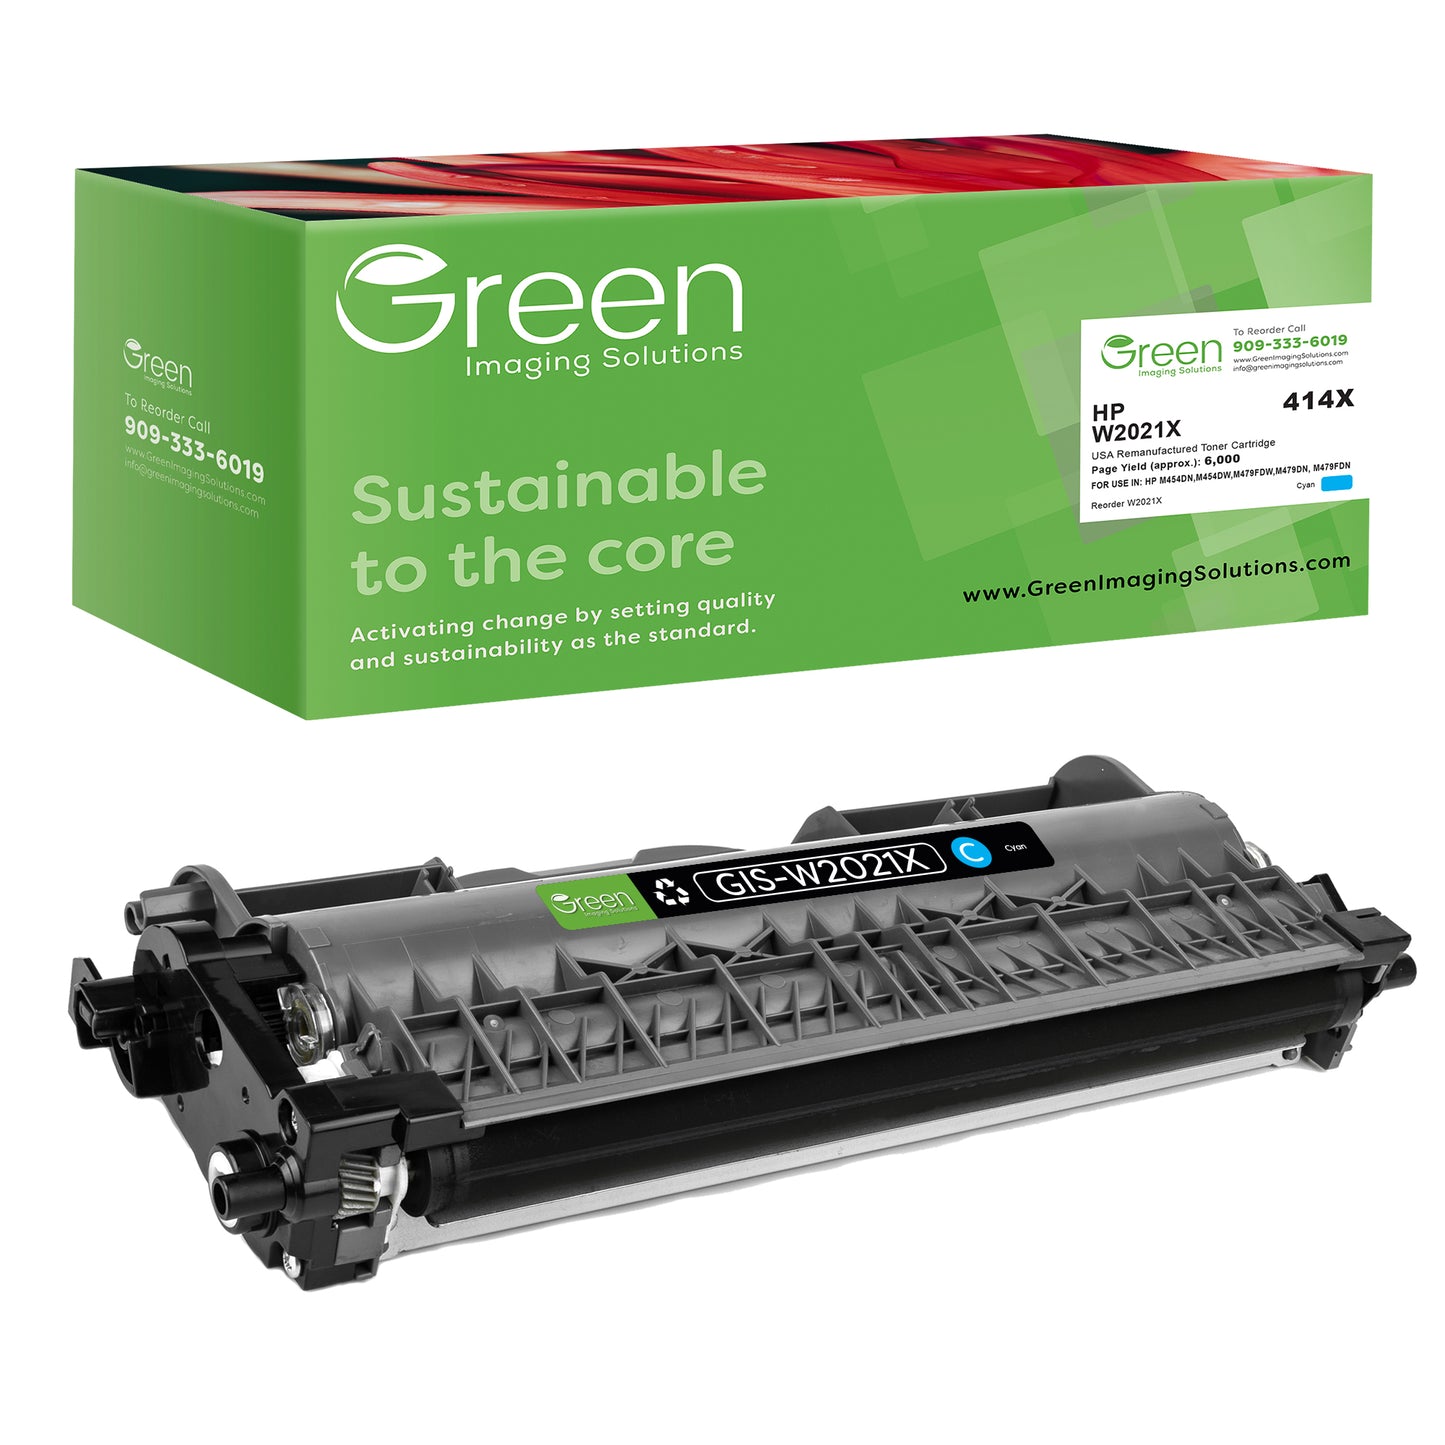 Green Imaging Solutions USA Remanufactured Toner Cartridge Replacement for HP W2021X |414X| - OEM Chip, Cyan, High Yield 6,000 Pages – For HP M454dn, M454dw, M479fdw, M479dn, M479fdn